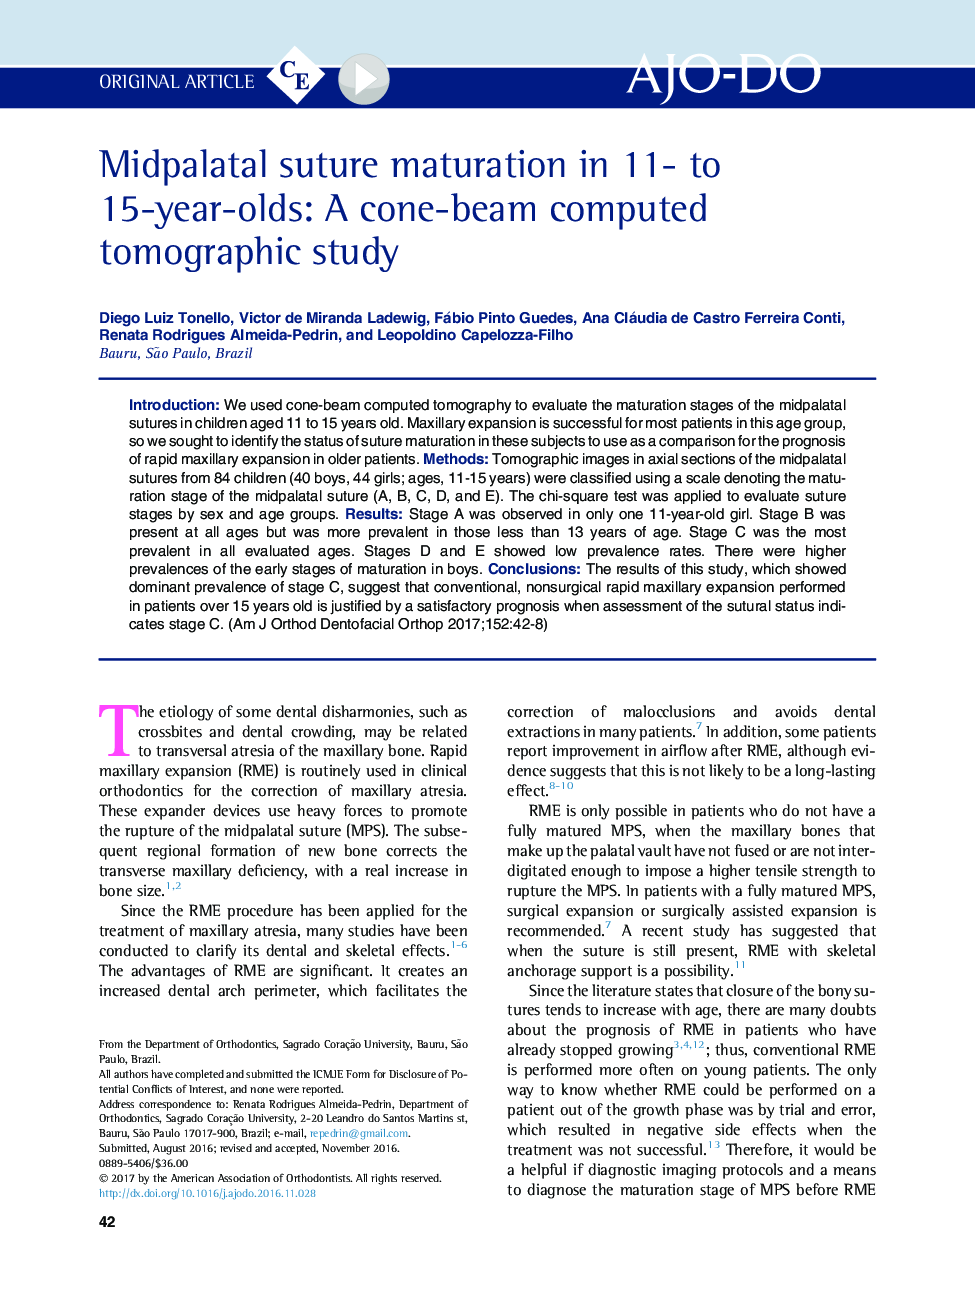 Midpalatal suture maturation in 11- to 15-year-olds: A cone-beam computed tomographic study